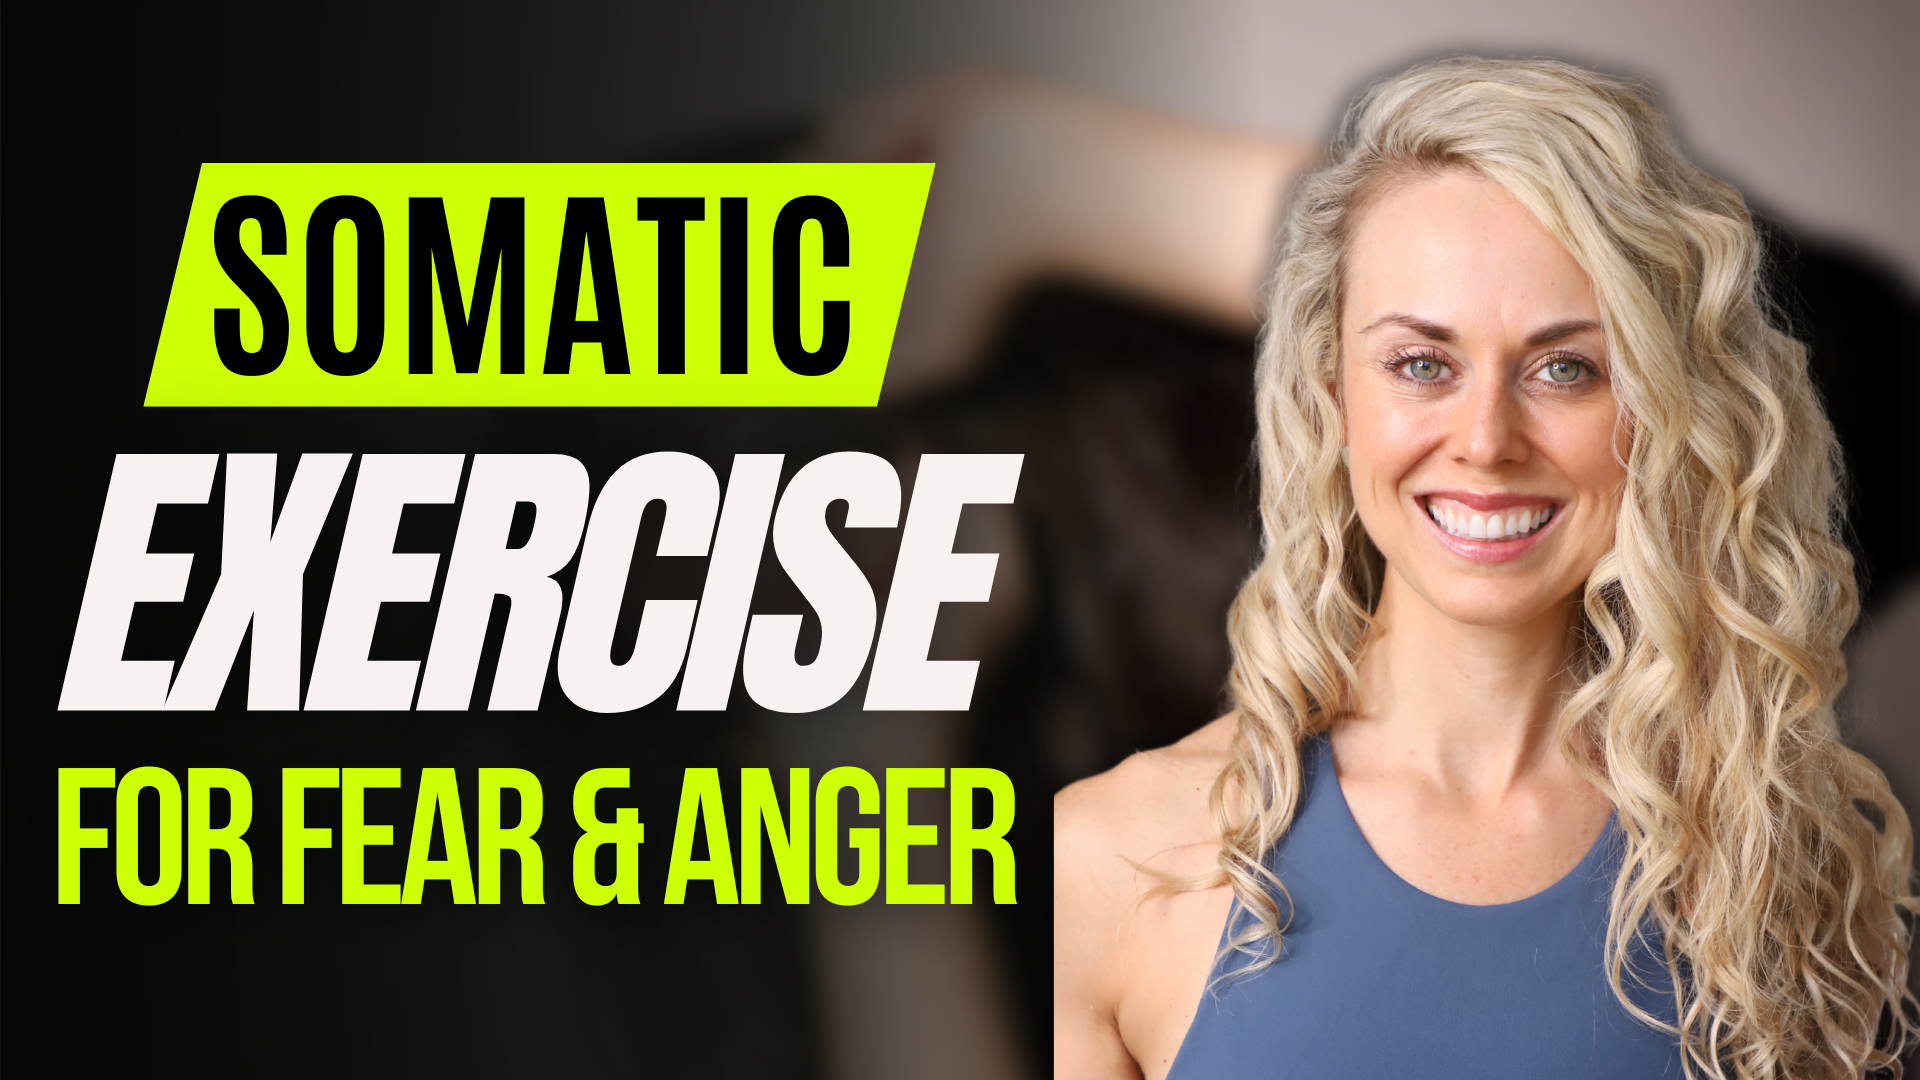 Somatic Exercise for Anger and Fear